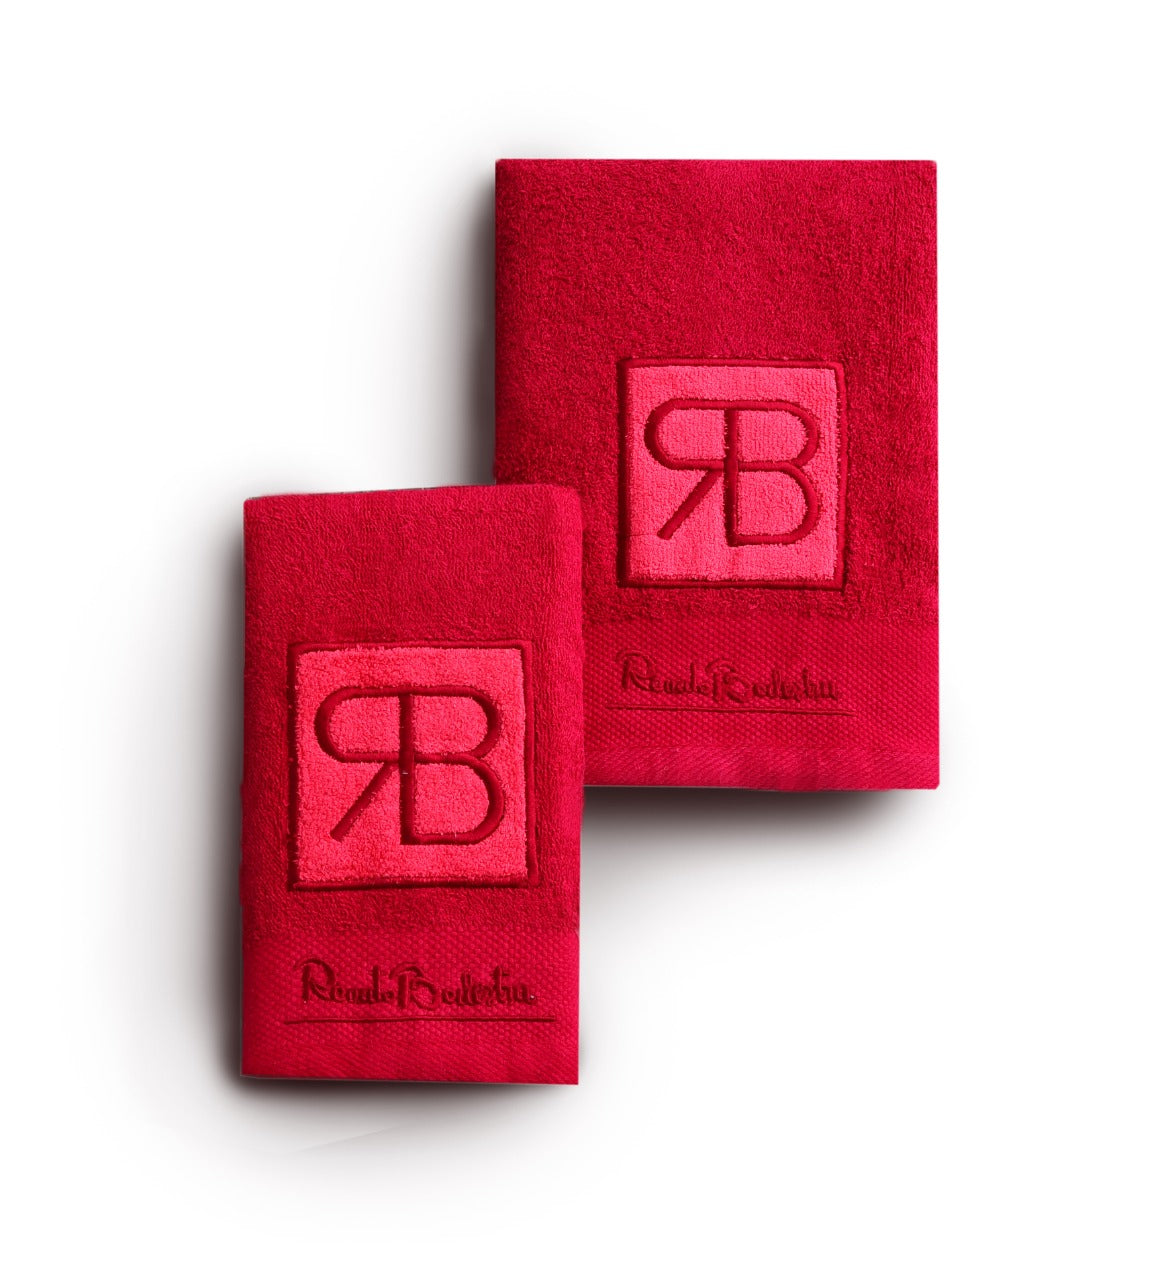 2 PCs RB Embroidered Kitchen Towels- Red Apricot